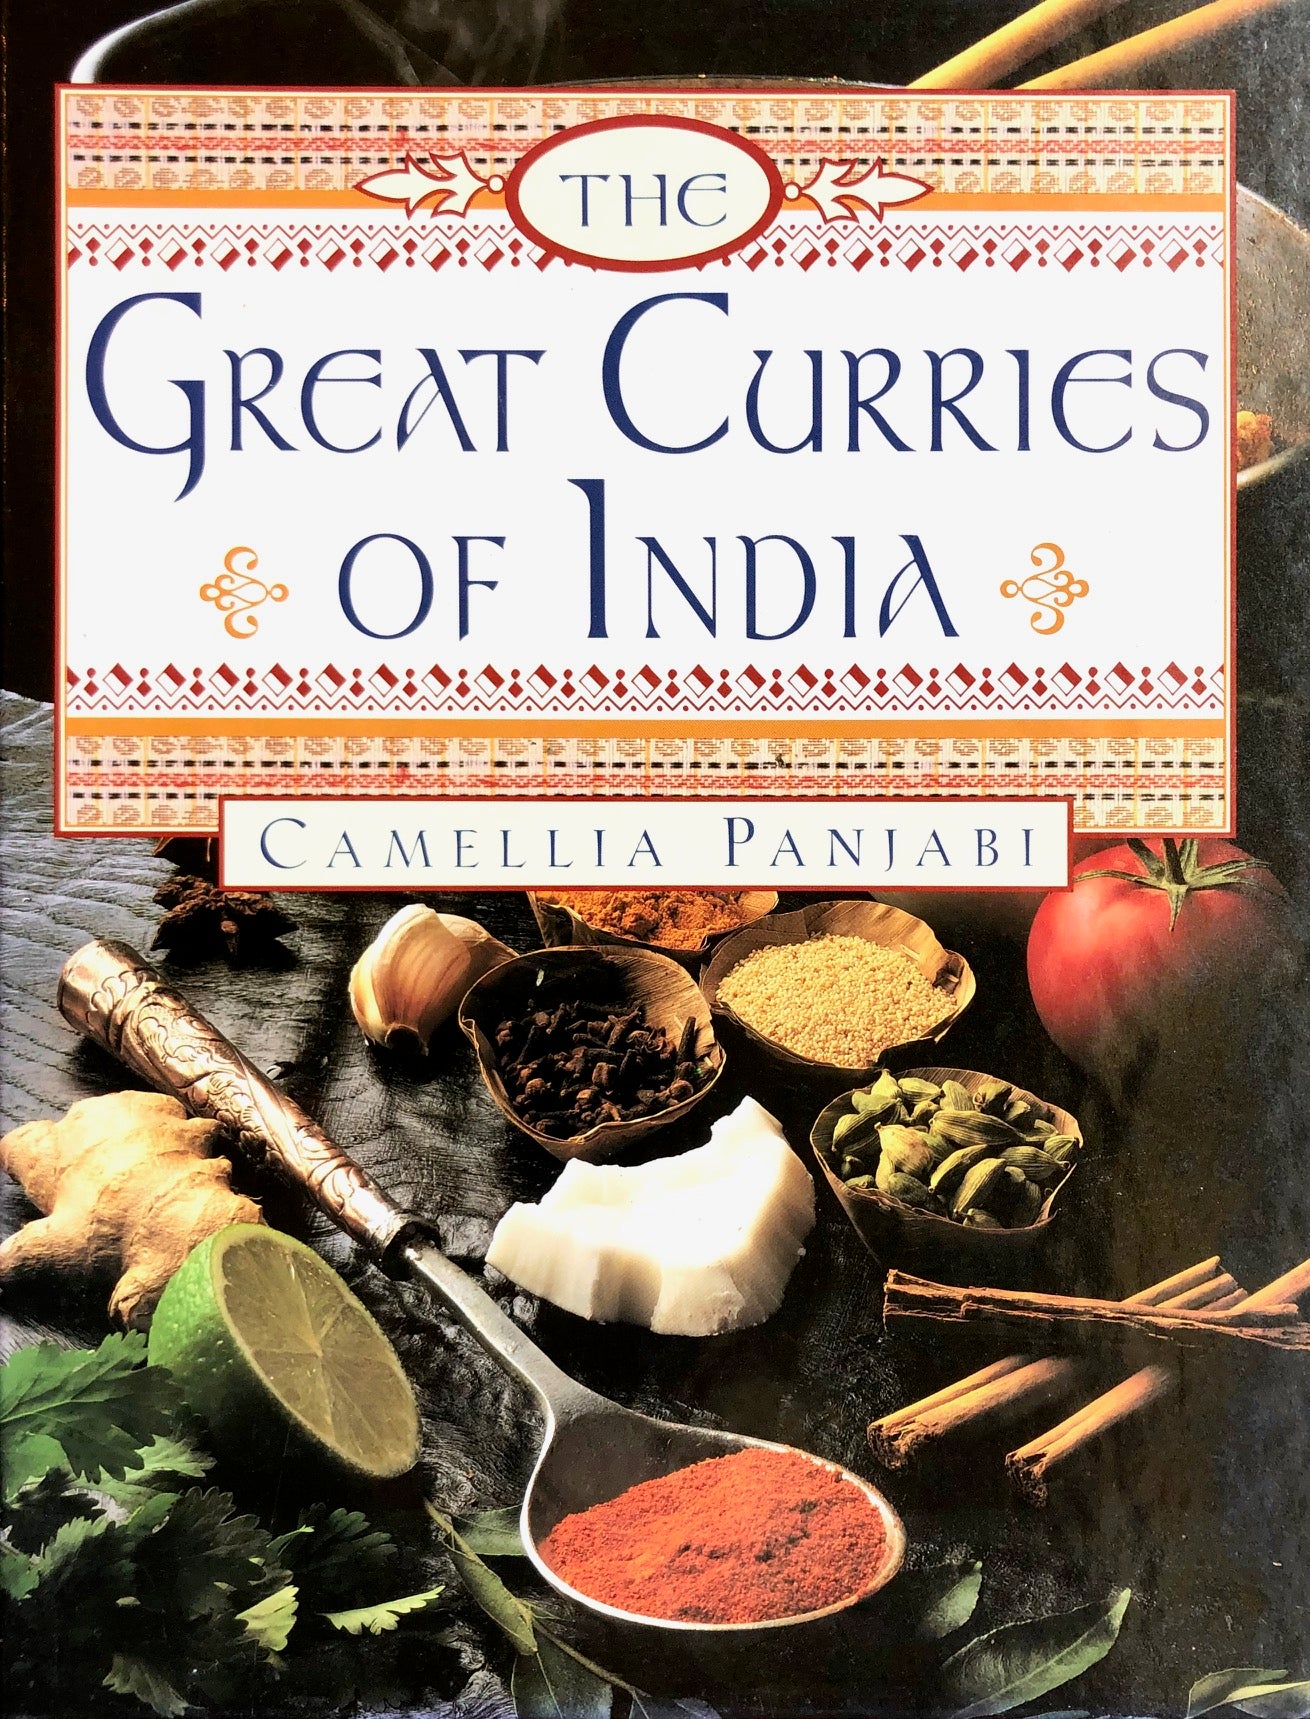 (Indian) Camellia Panjabi. The Great Curries of India